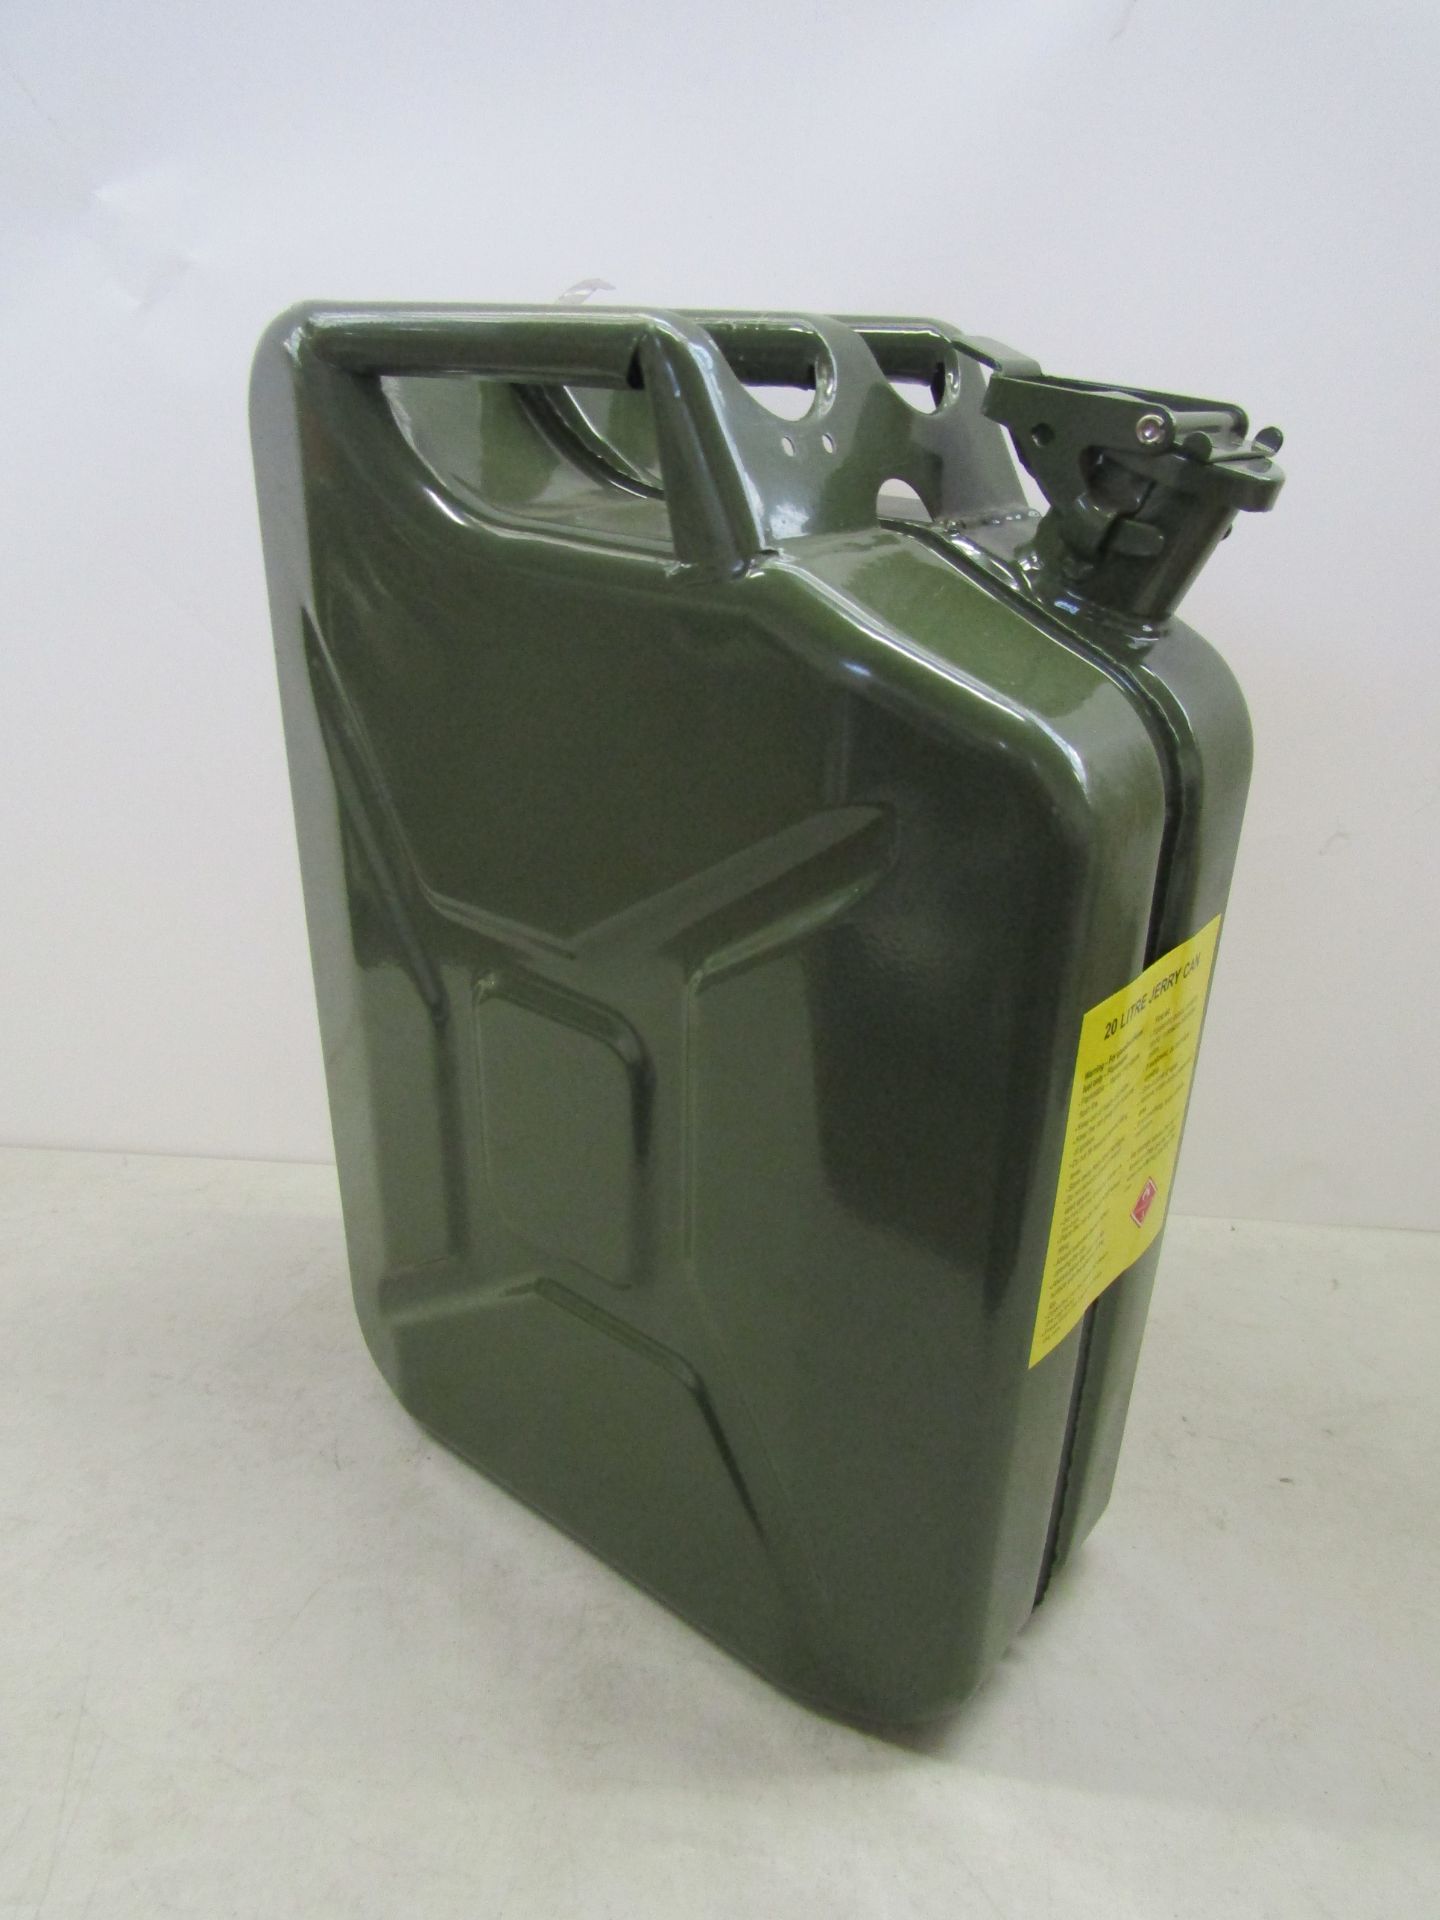 20L Olive green colour jerry can, has been used and is dented.